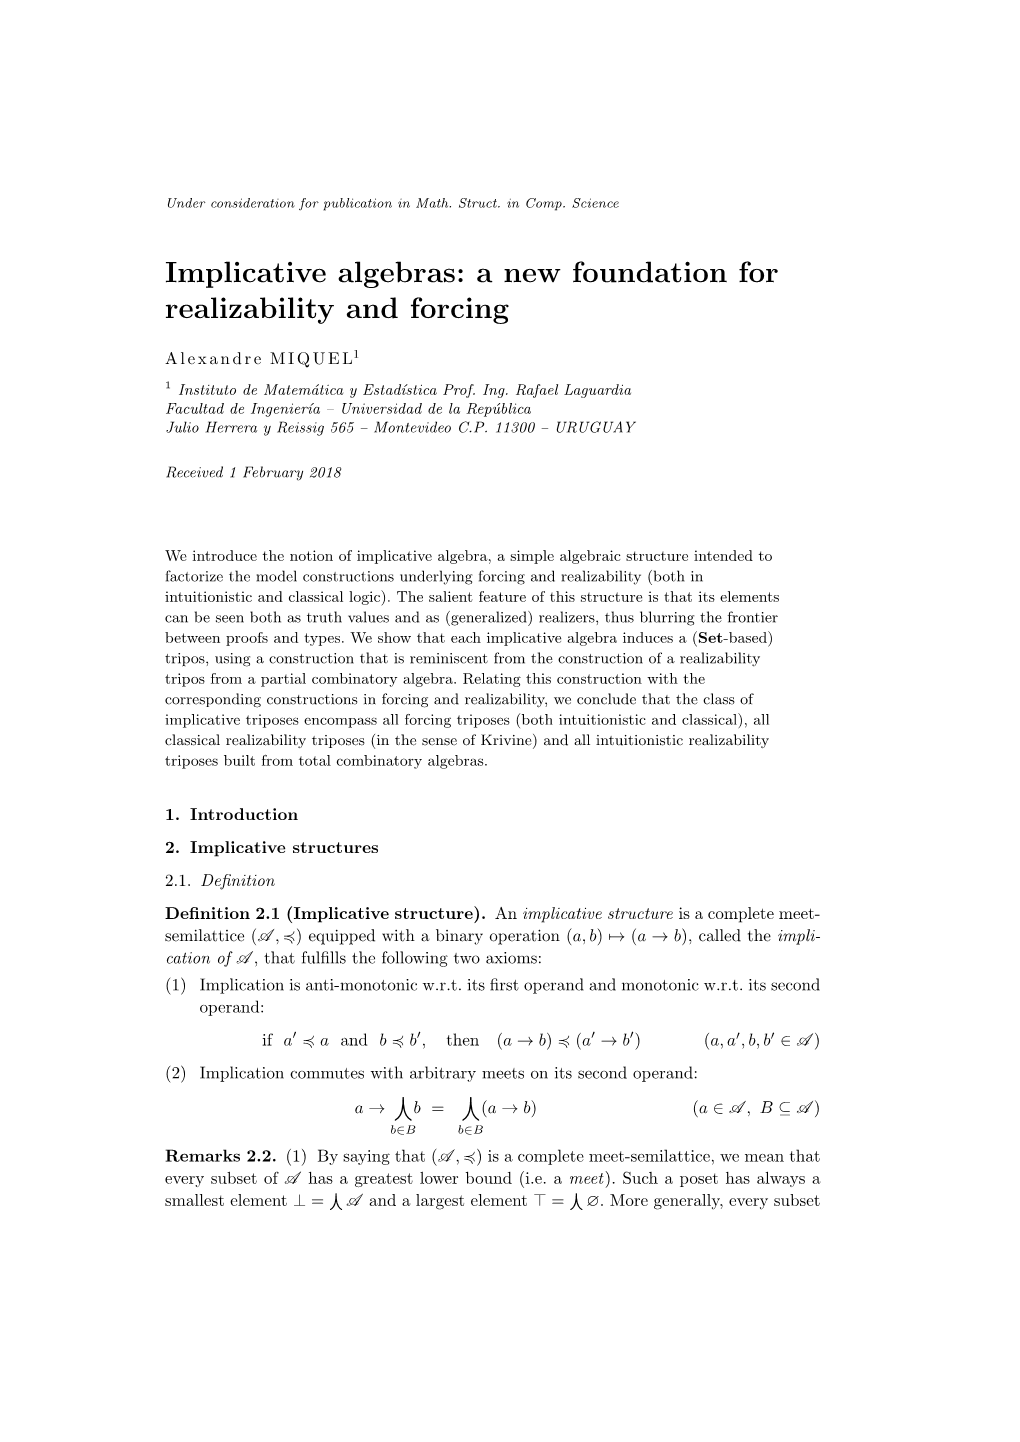 Implicative Algebras: a New Foundation for Realizability and Forcing